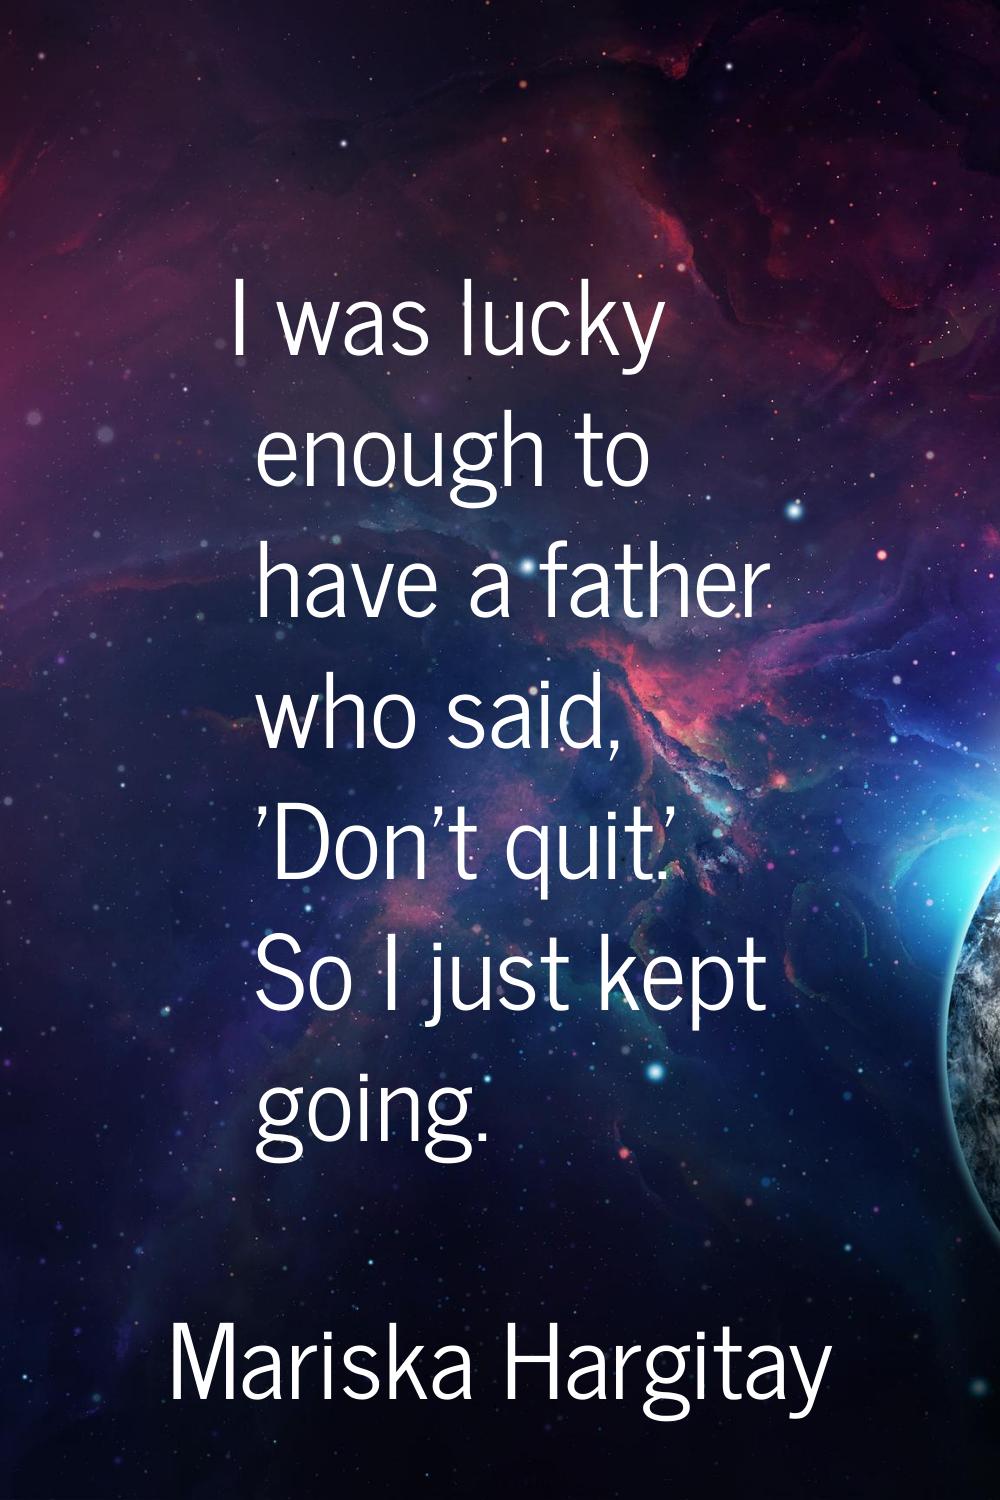 I was lucky enough to have a father who said, 'Don't quit.' So I just kept going.